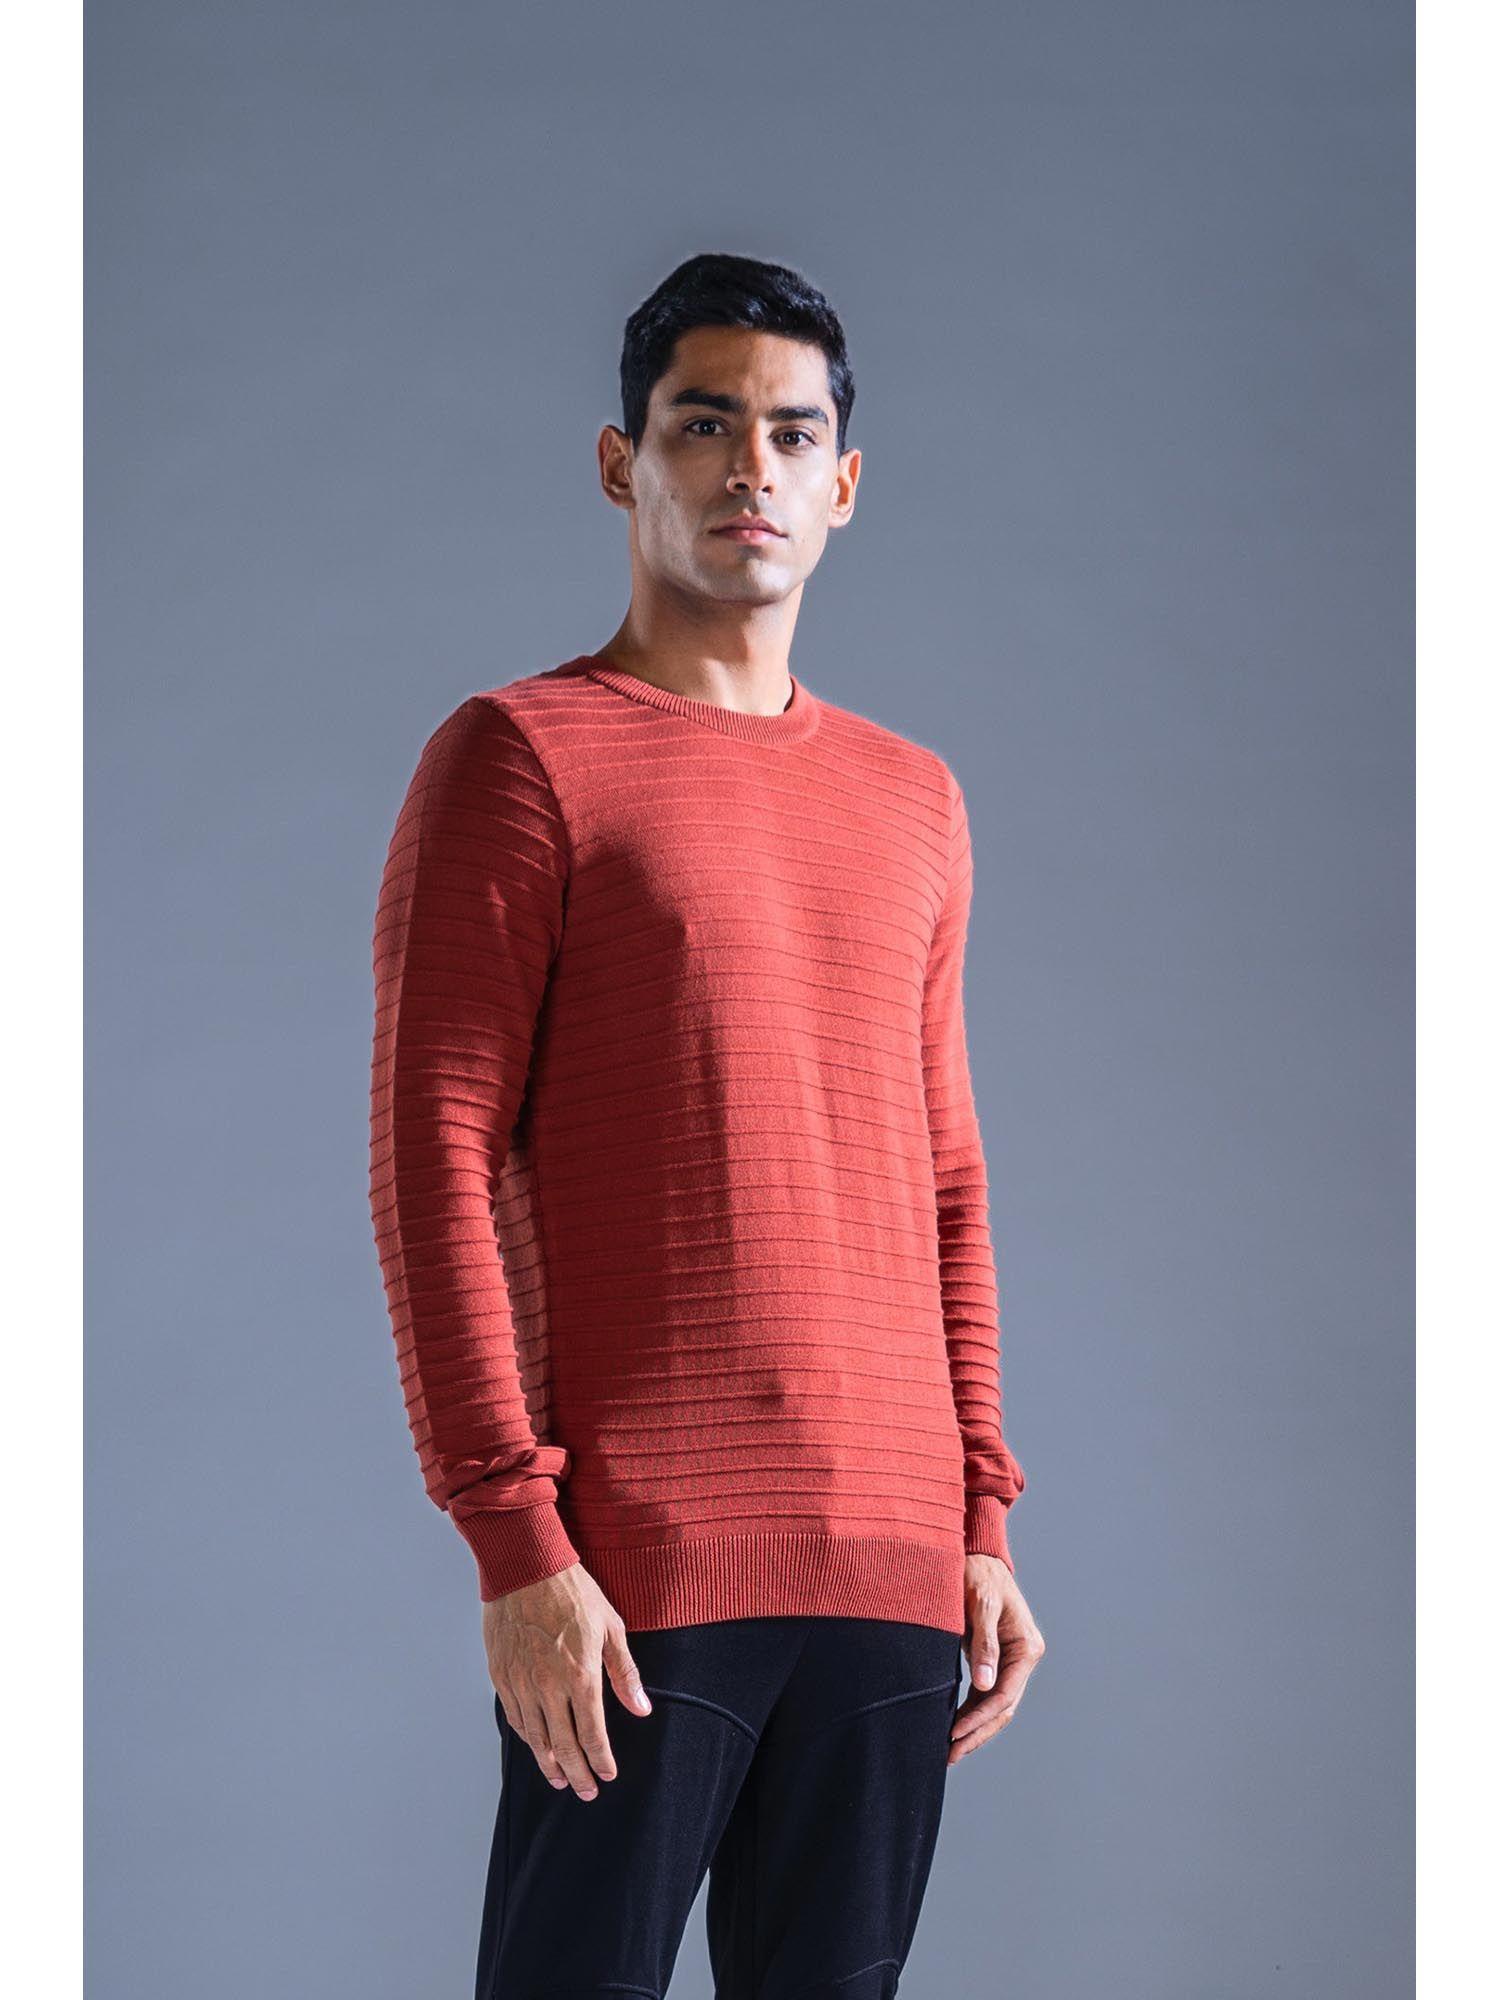 brick cotton knit sweater classic pull over